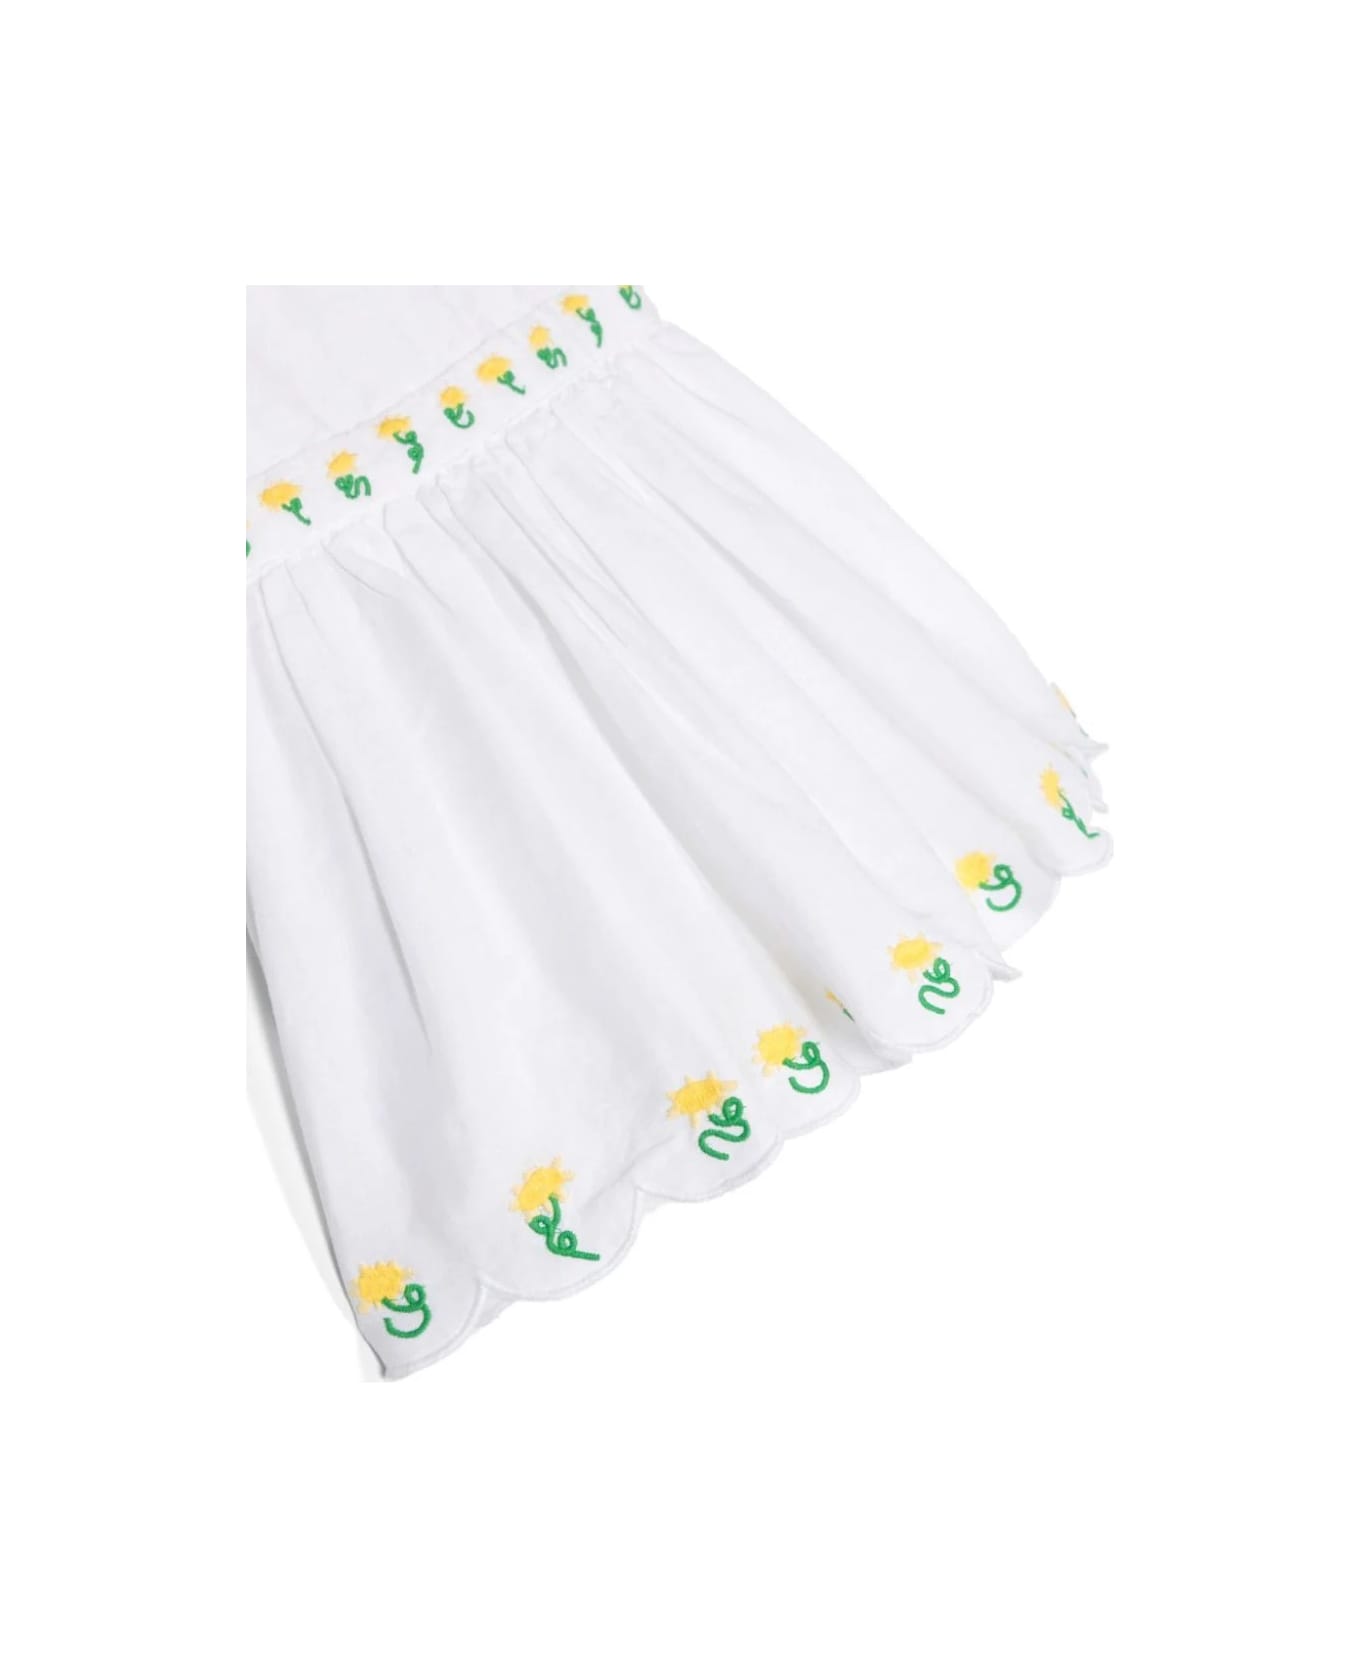 Stella McCartney Kids White Dress With Flower Embroidery - White